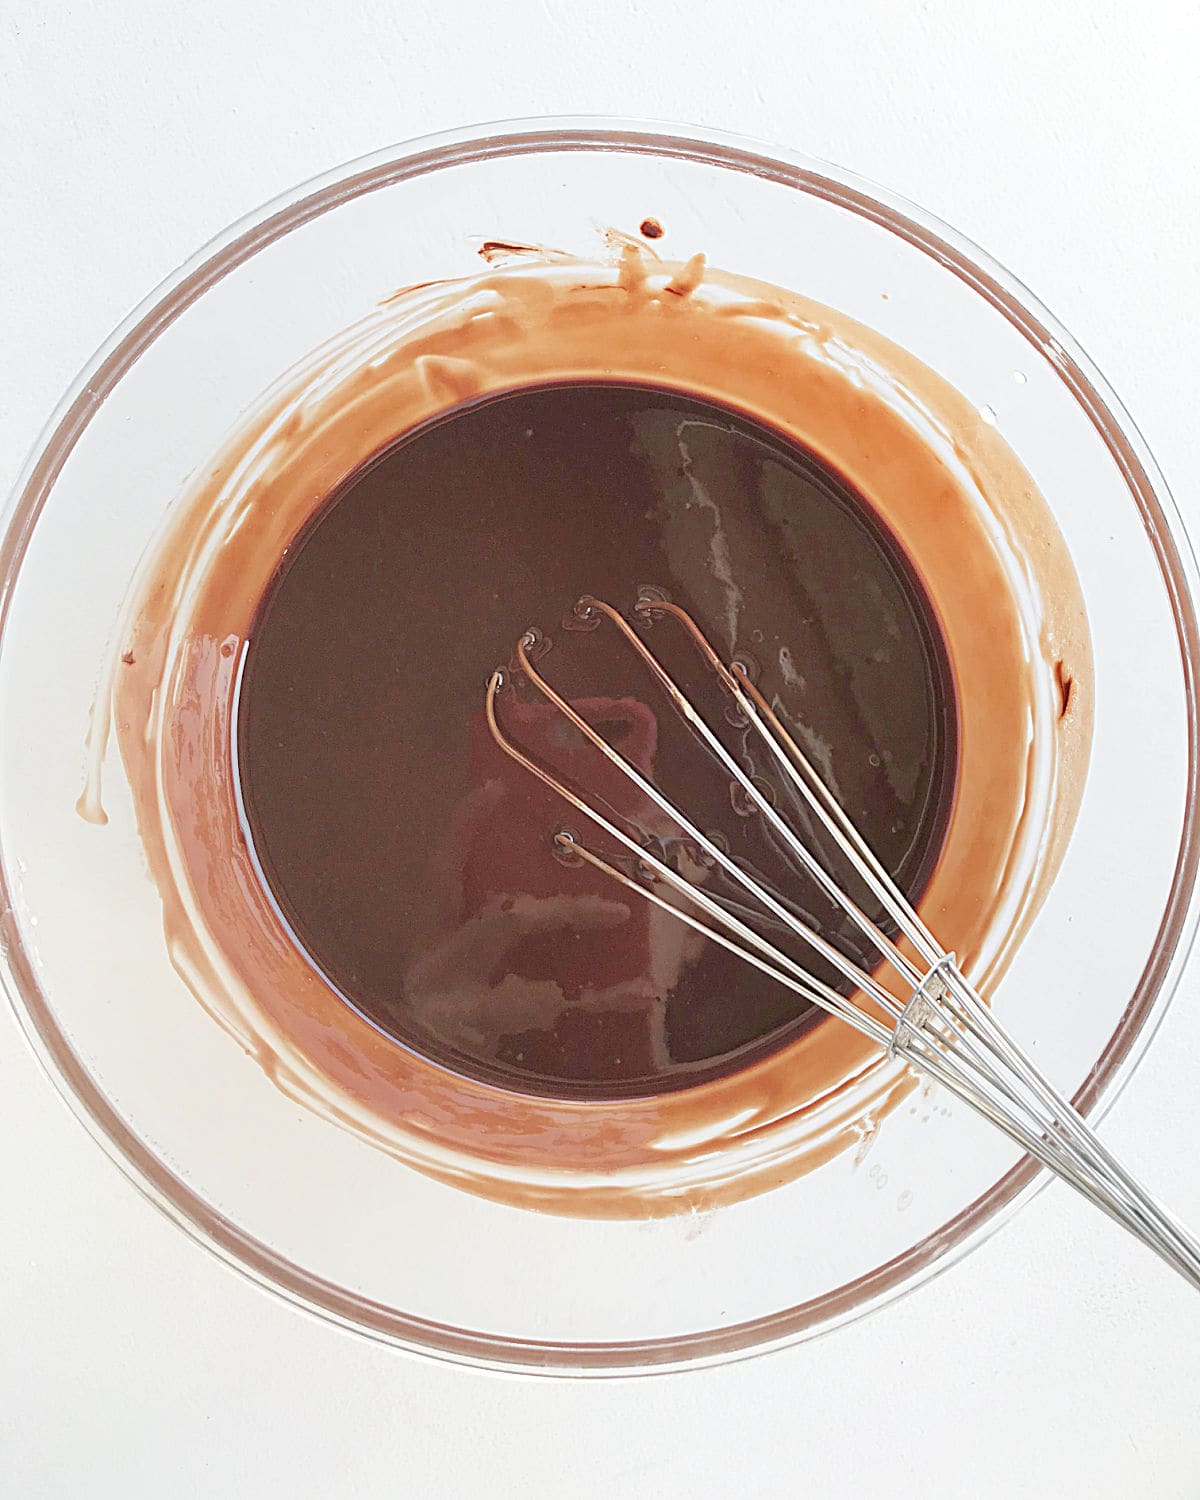 A whisk inside a glass bowl with melted chocolate and butter on a white surface.